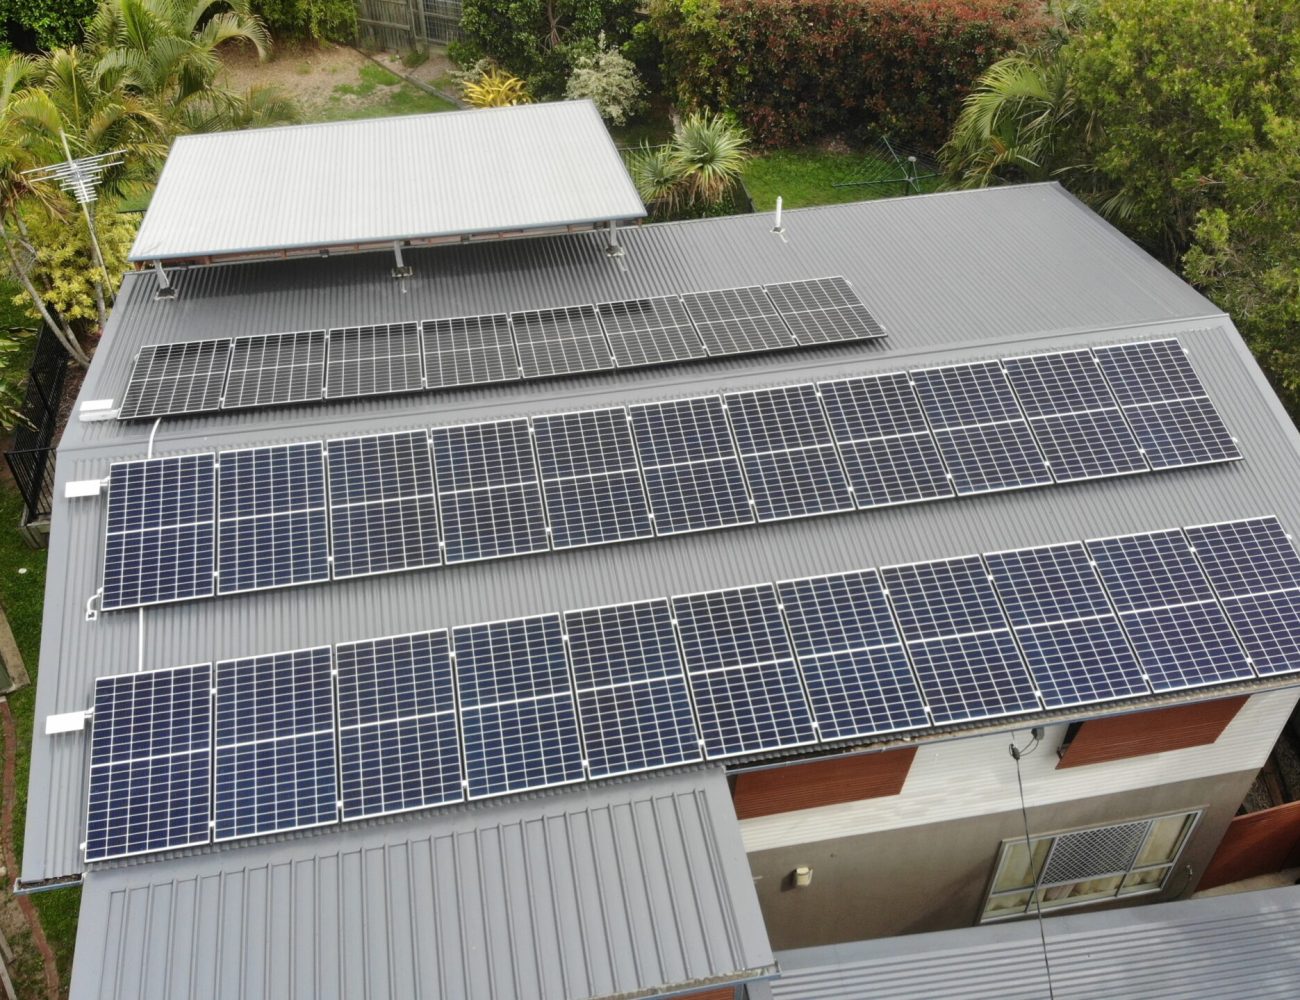 An aerial view of a residential building with solar panels on the roof